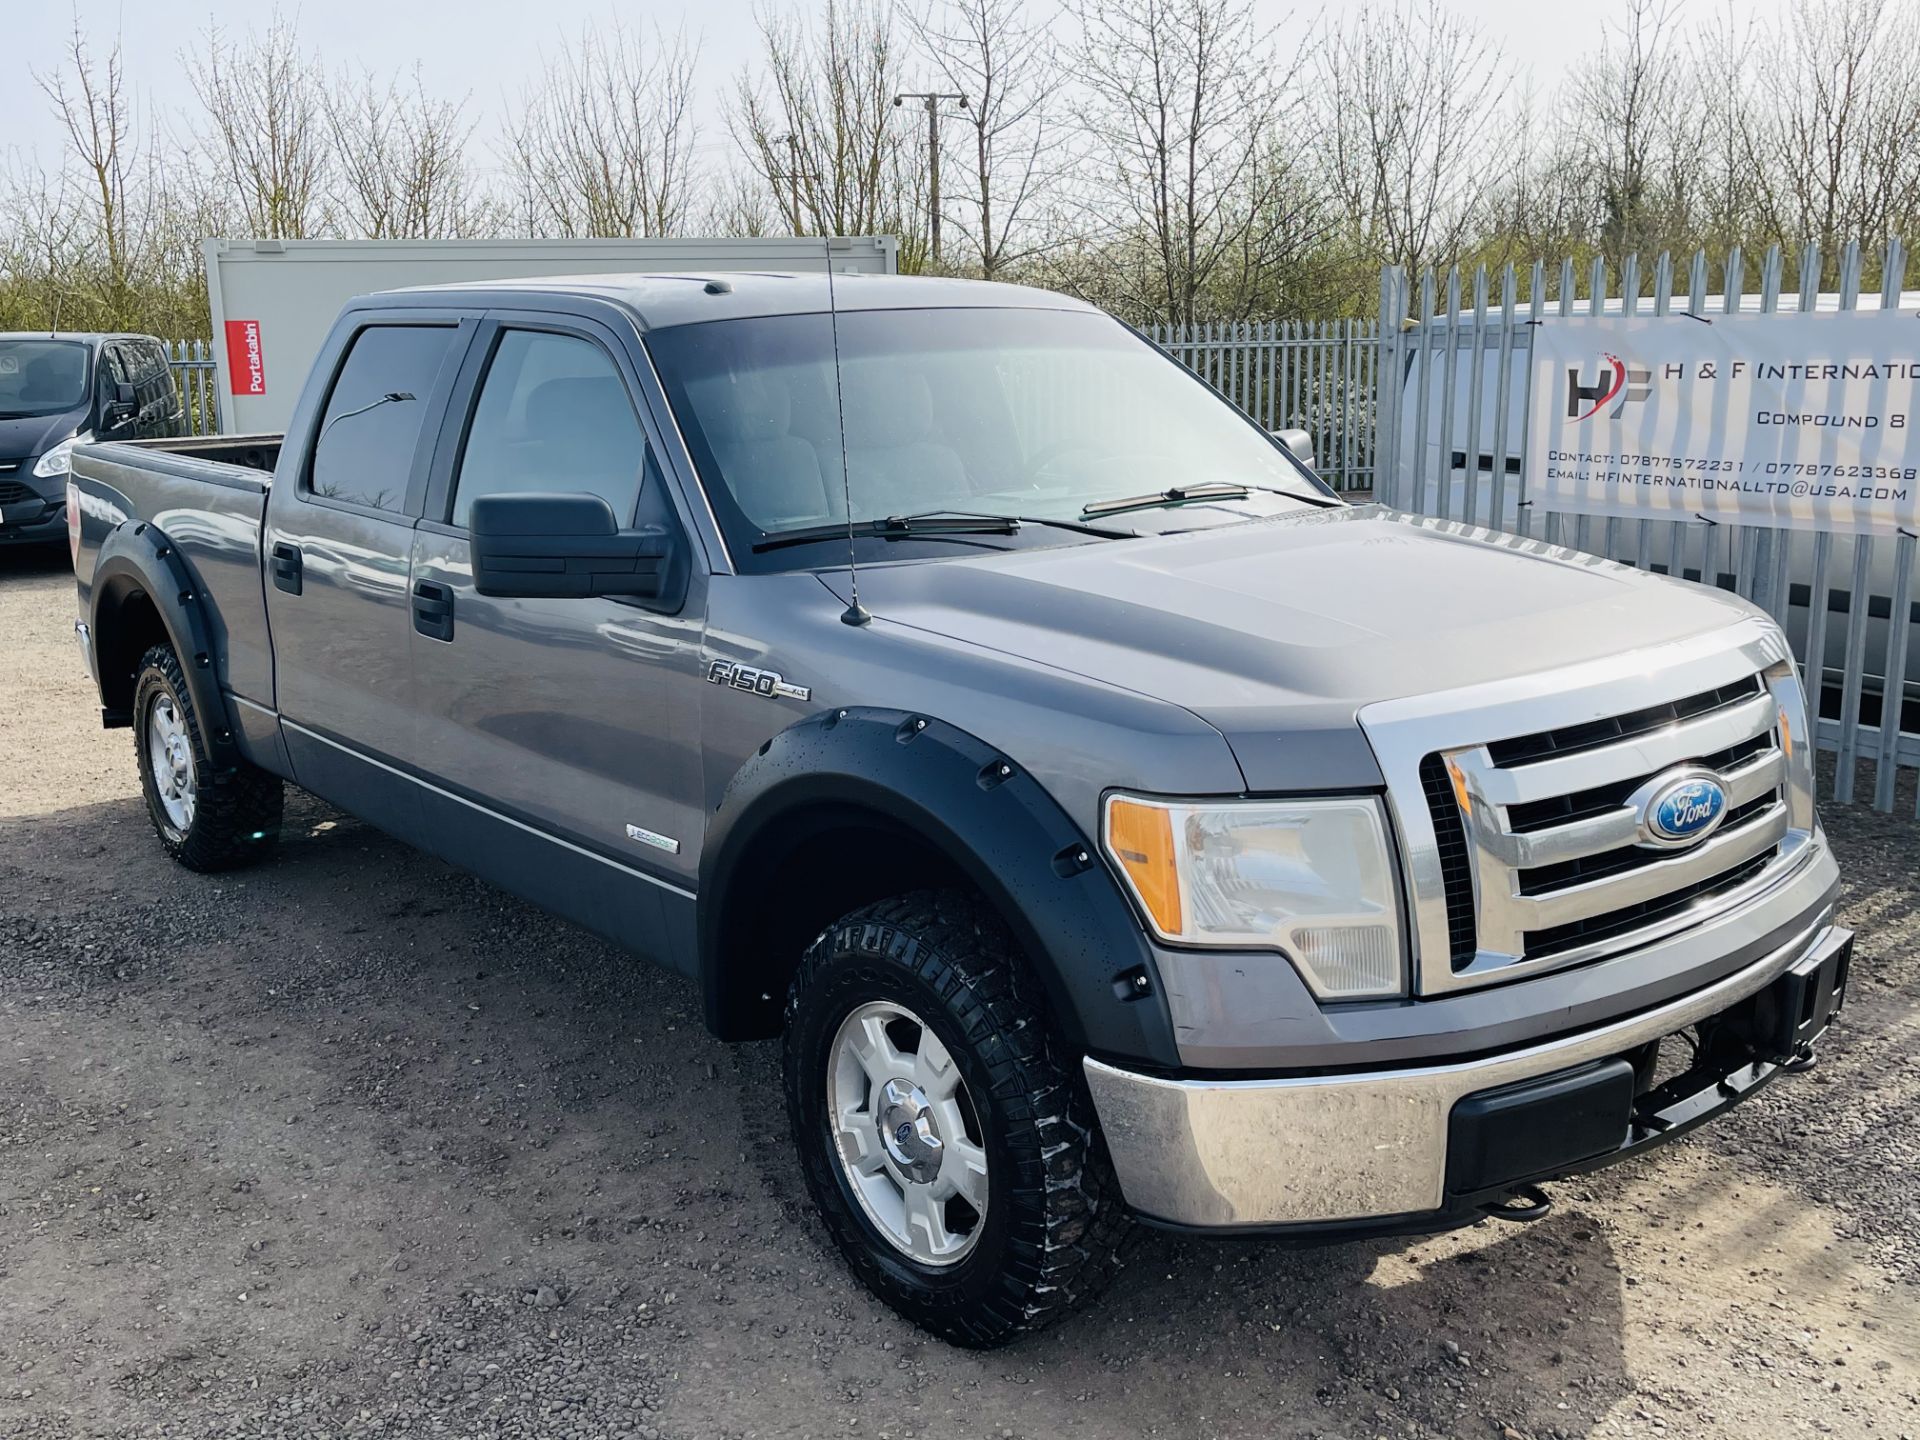 Ford F-150 XLT Edition 3.5L V6 Eco-boost Super-Crew 4x4 - '2012 Year' - Air Con - No Vat save 20% - Image 12 of 25